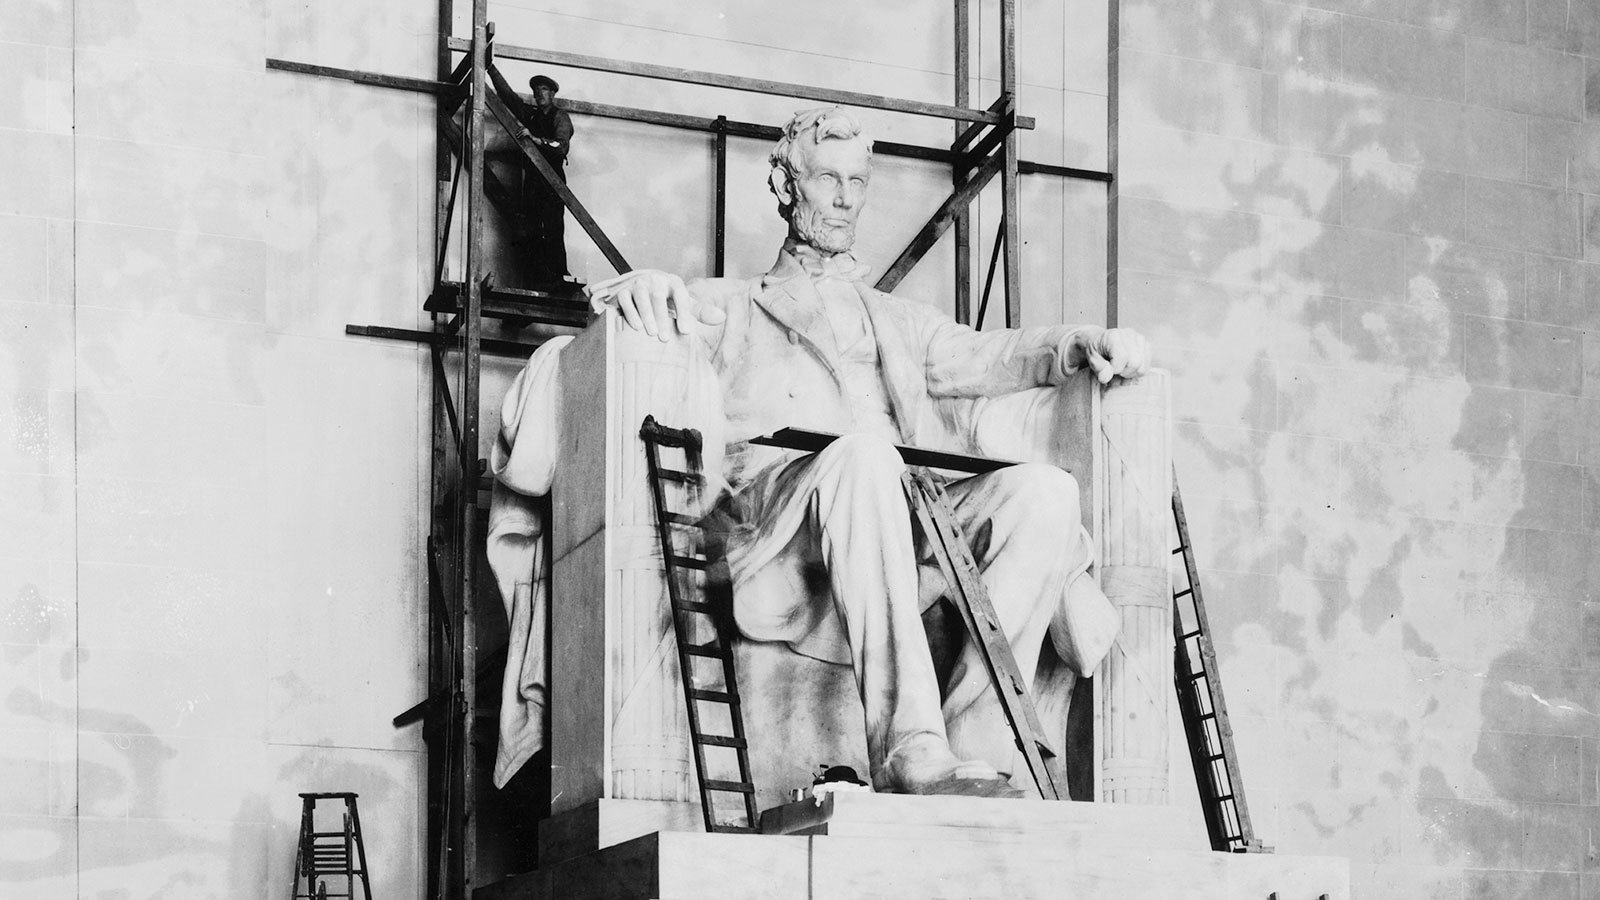 The Lincoln statue under construction in the Lincoln Memorial